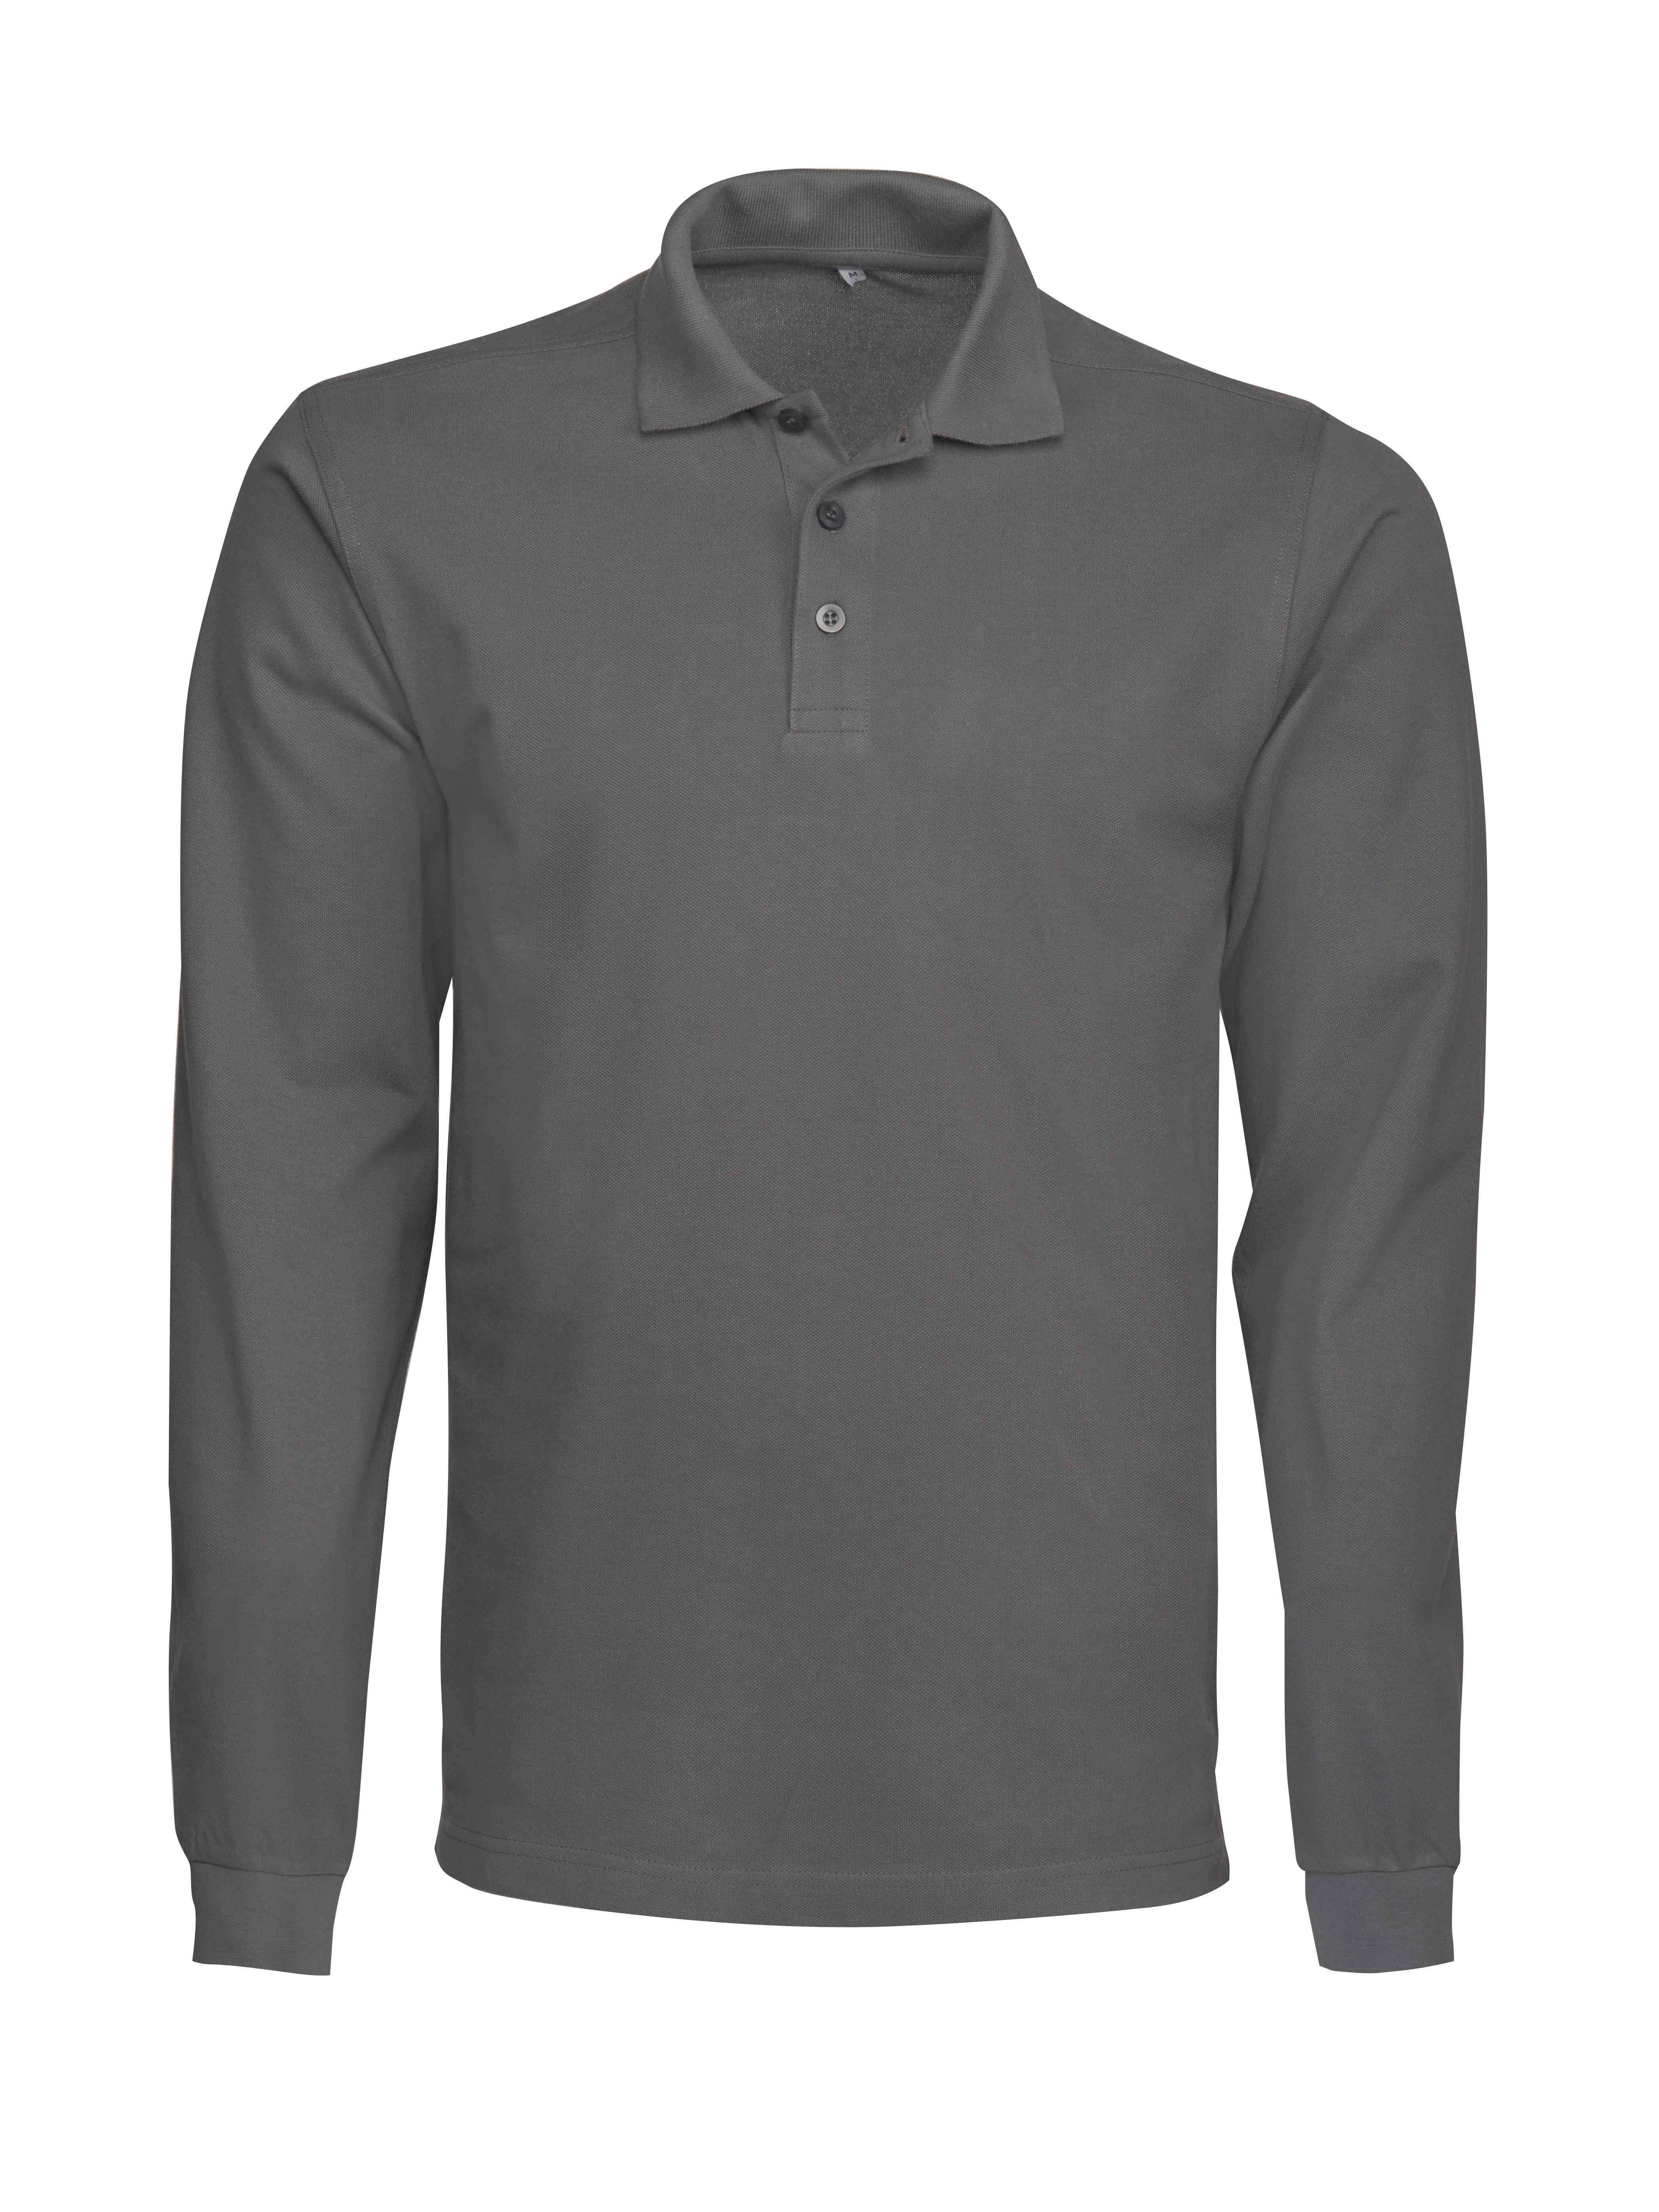 SURF POLO RSX L/S STEEL GREY PE-2265011-935-8